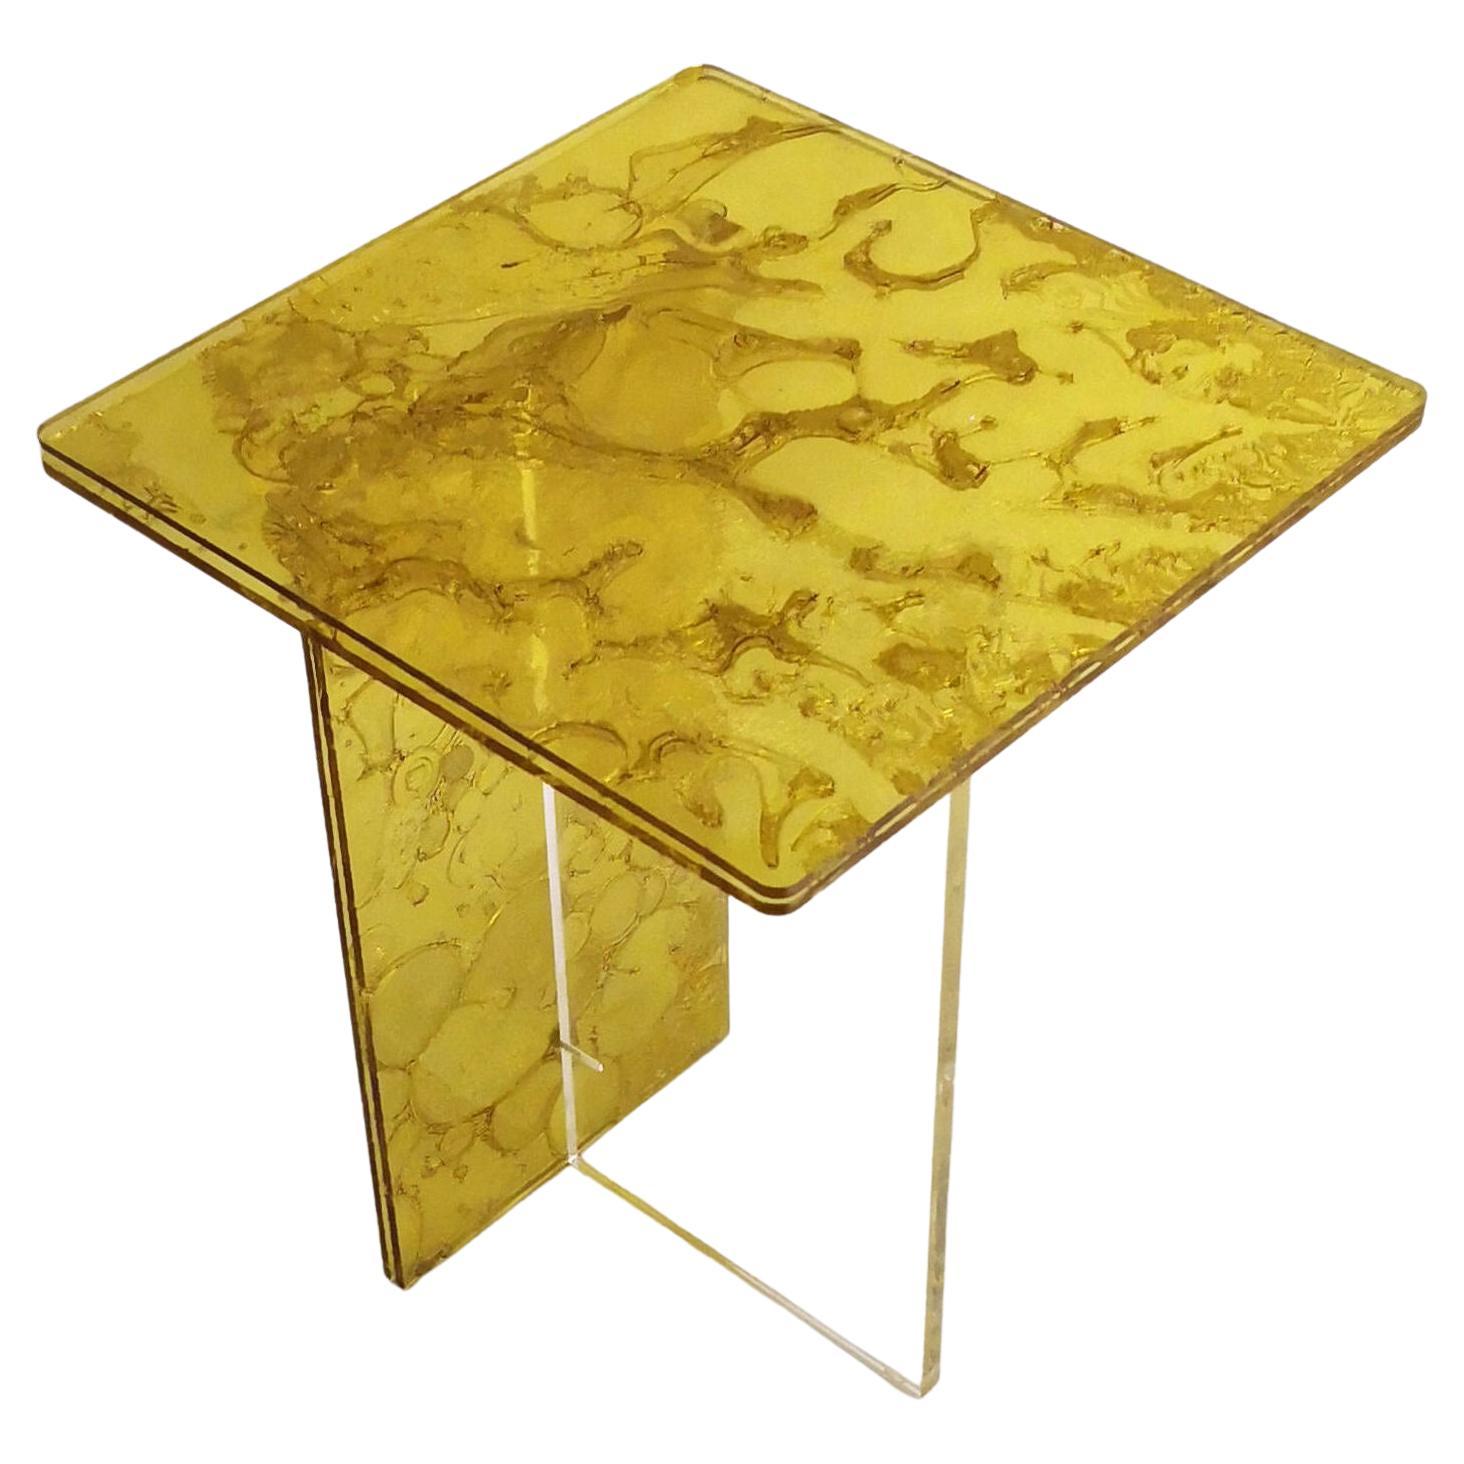 Sketch Mini Sidetable Made of Yellow Acrylic Des. Roberto Giacomucci in 2022